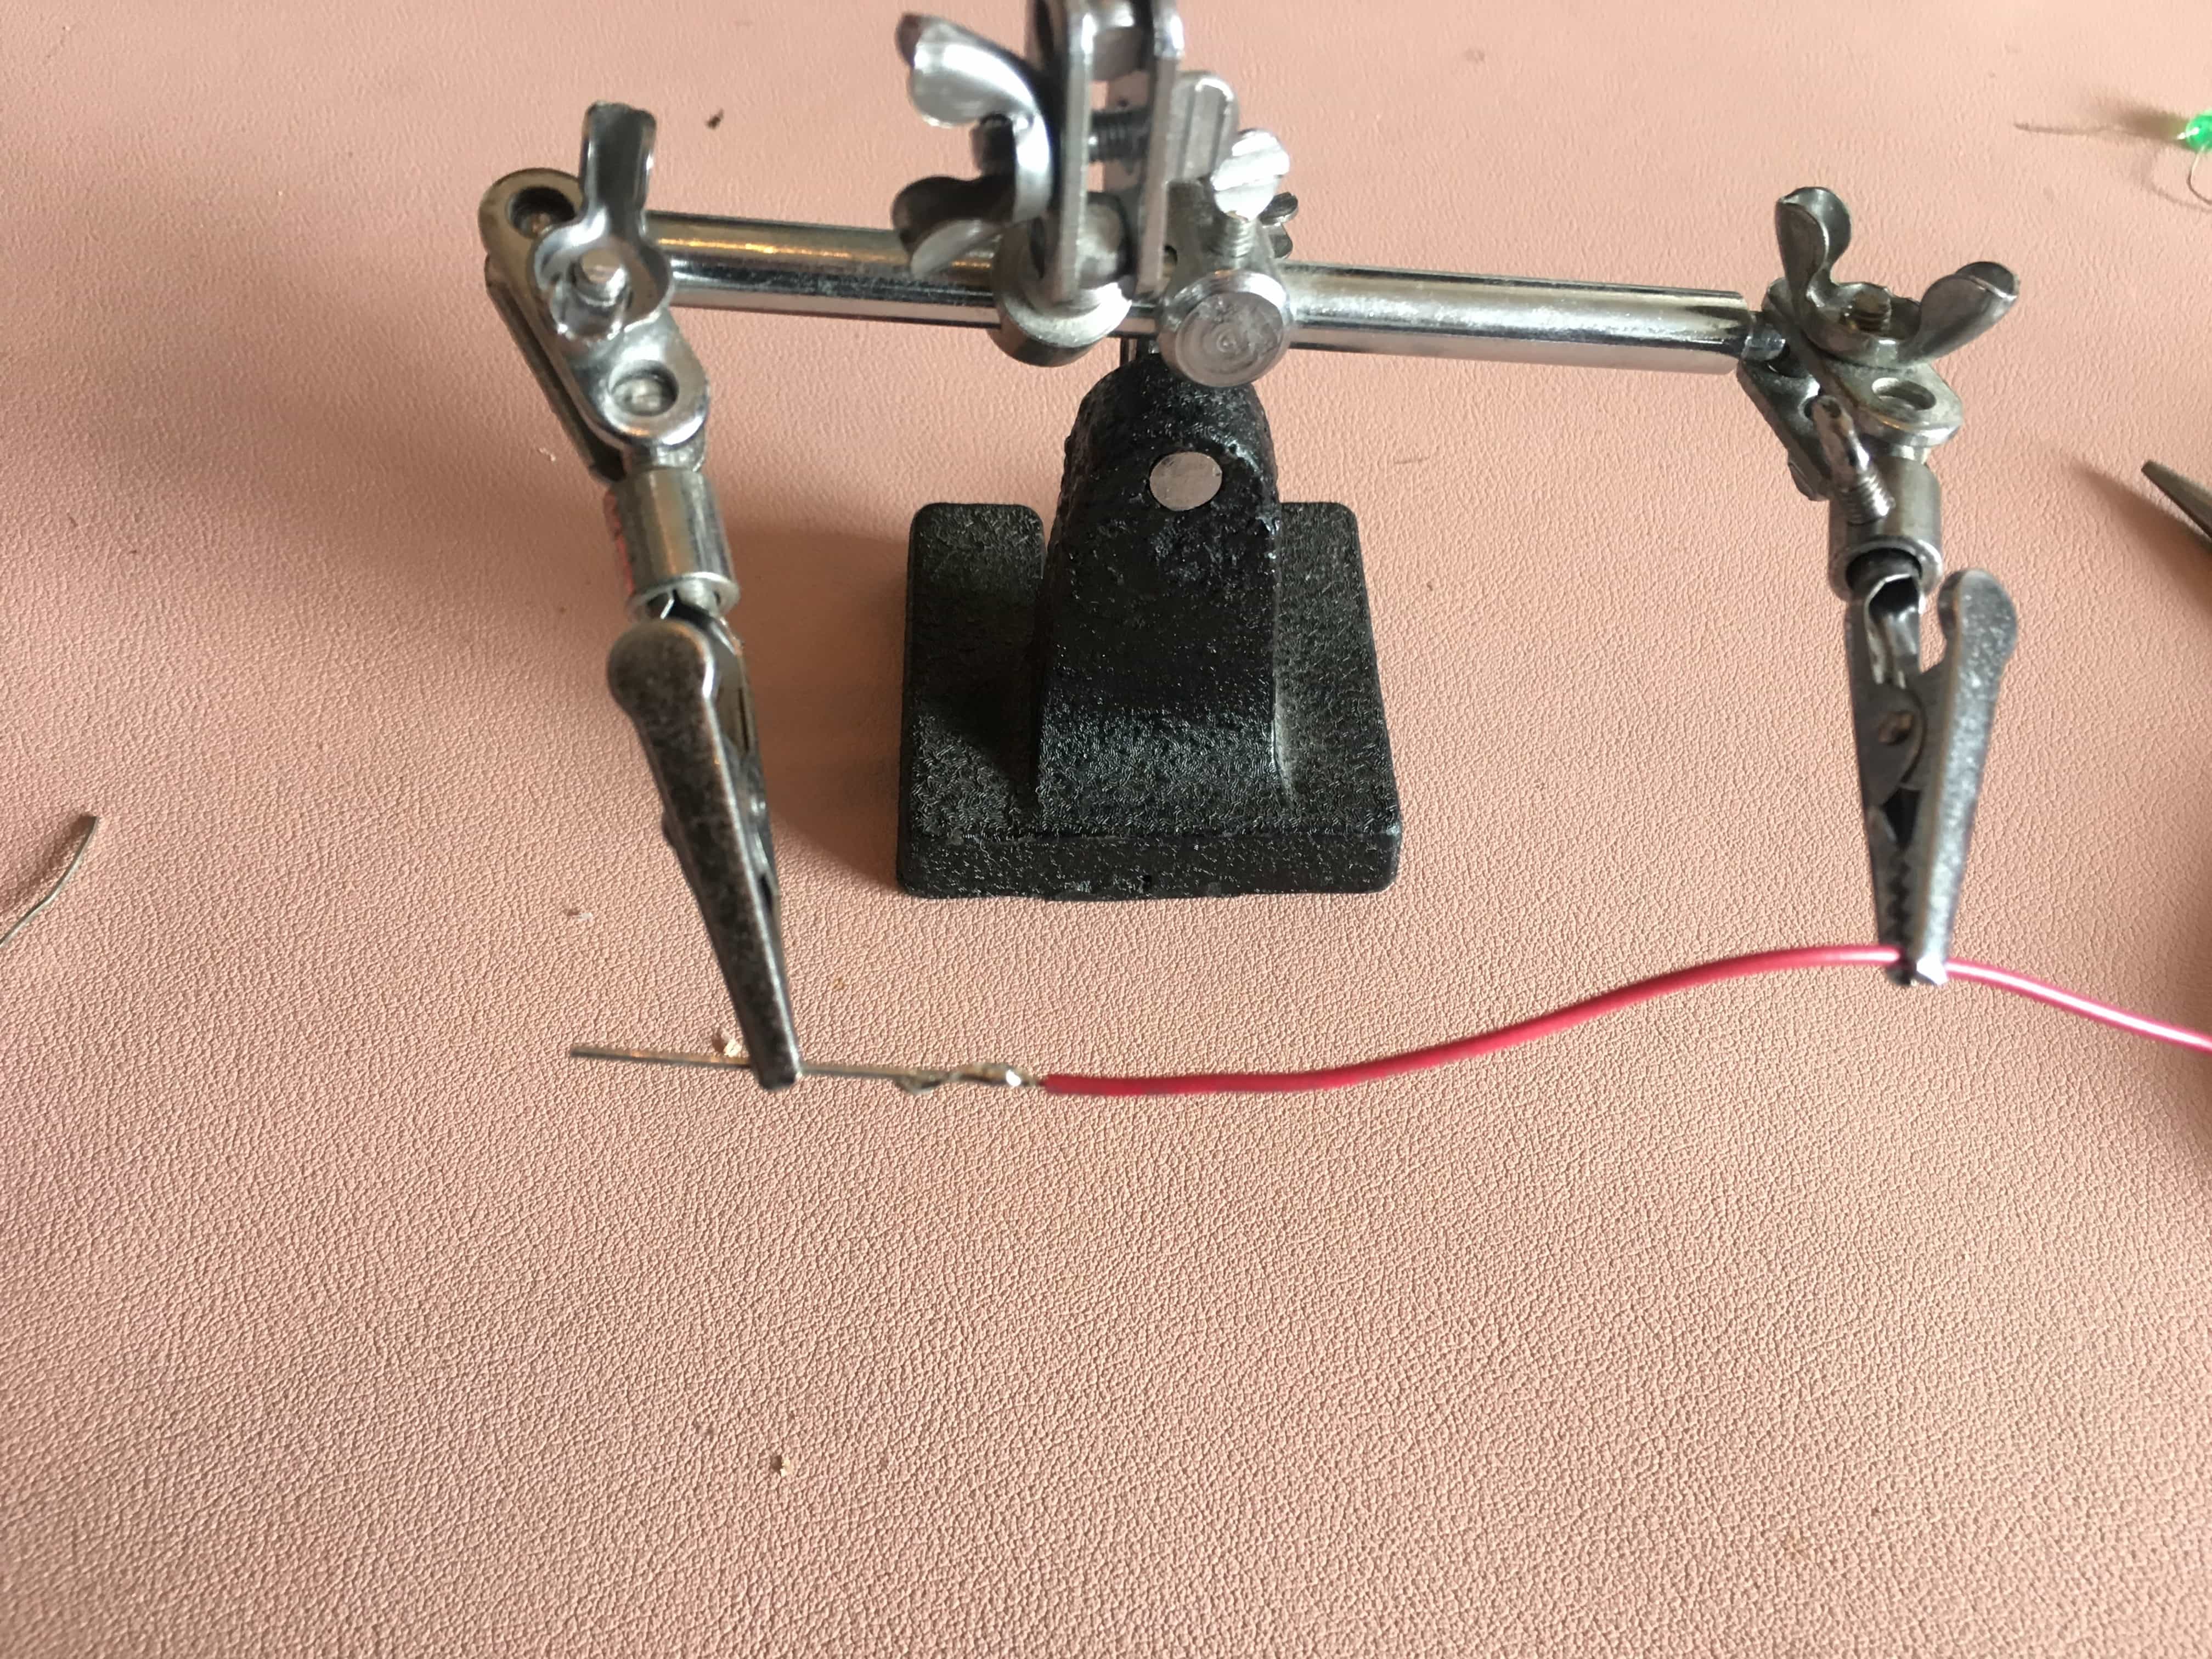 Metal rod soldered to red wire